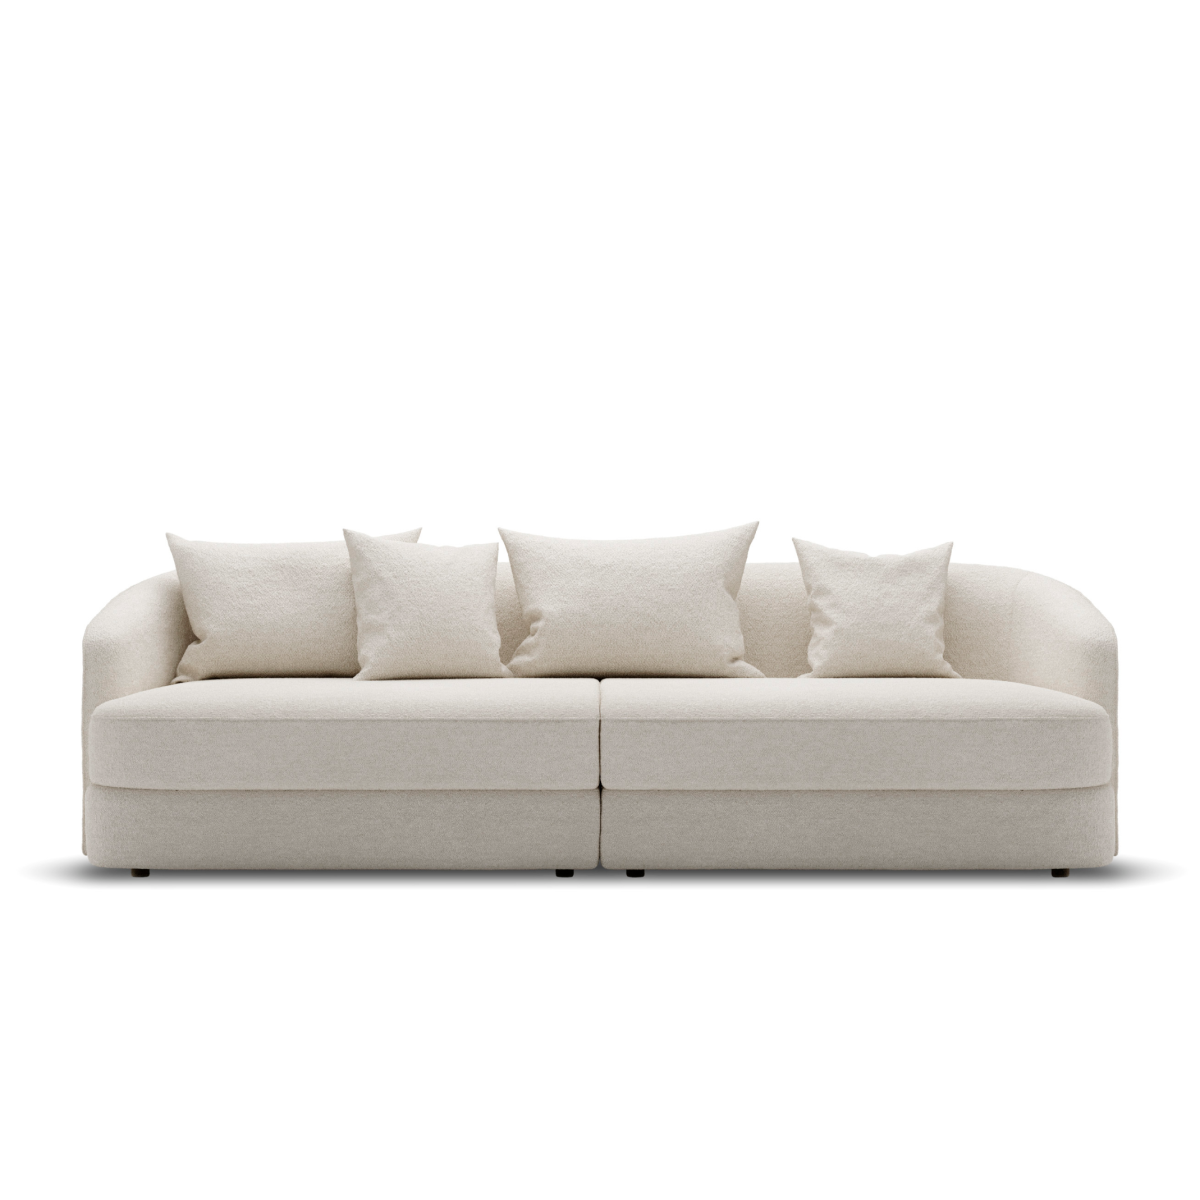 New Works Covent Residential Sofa - 2color